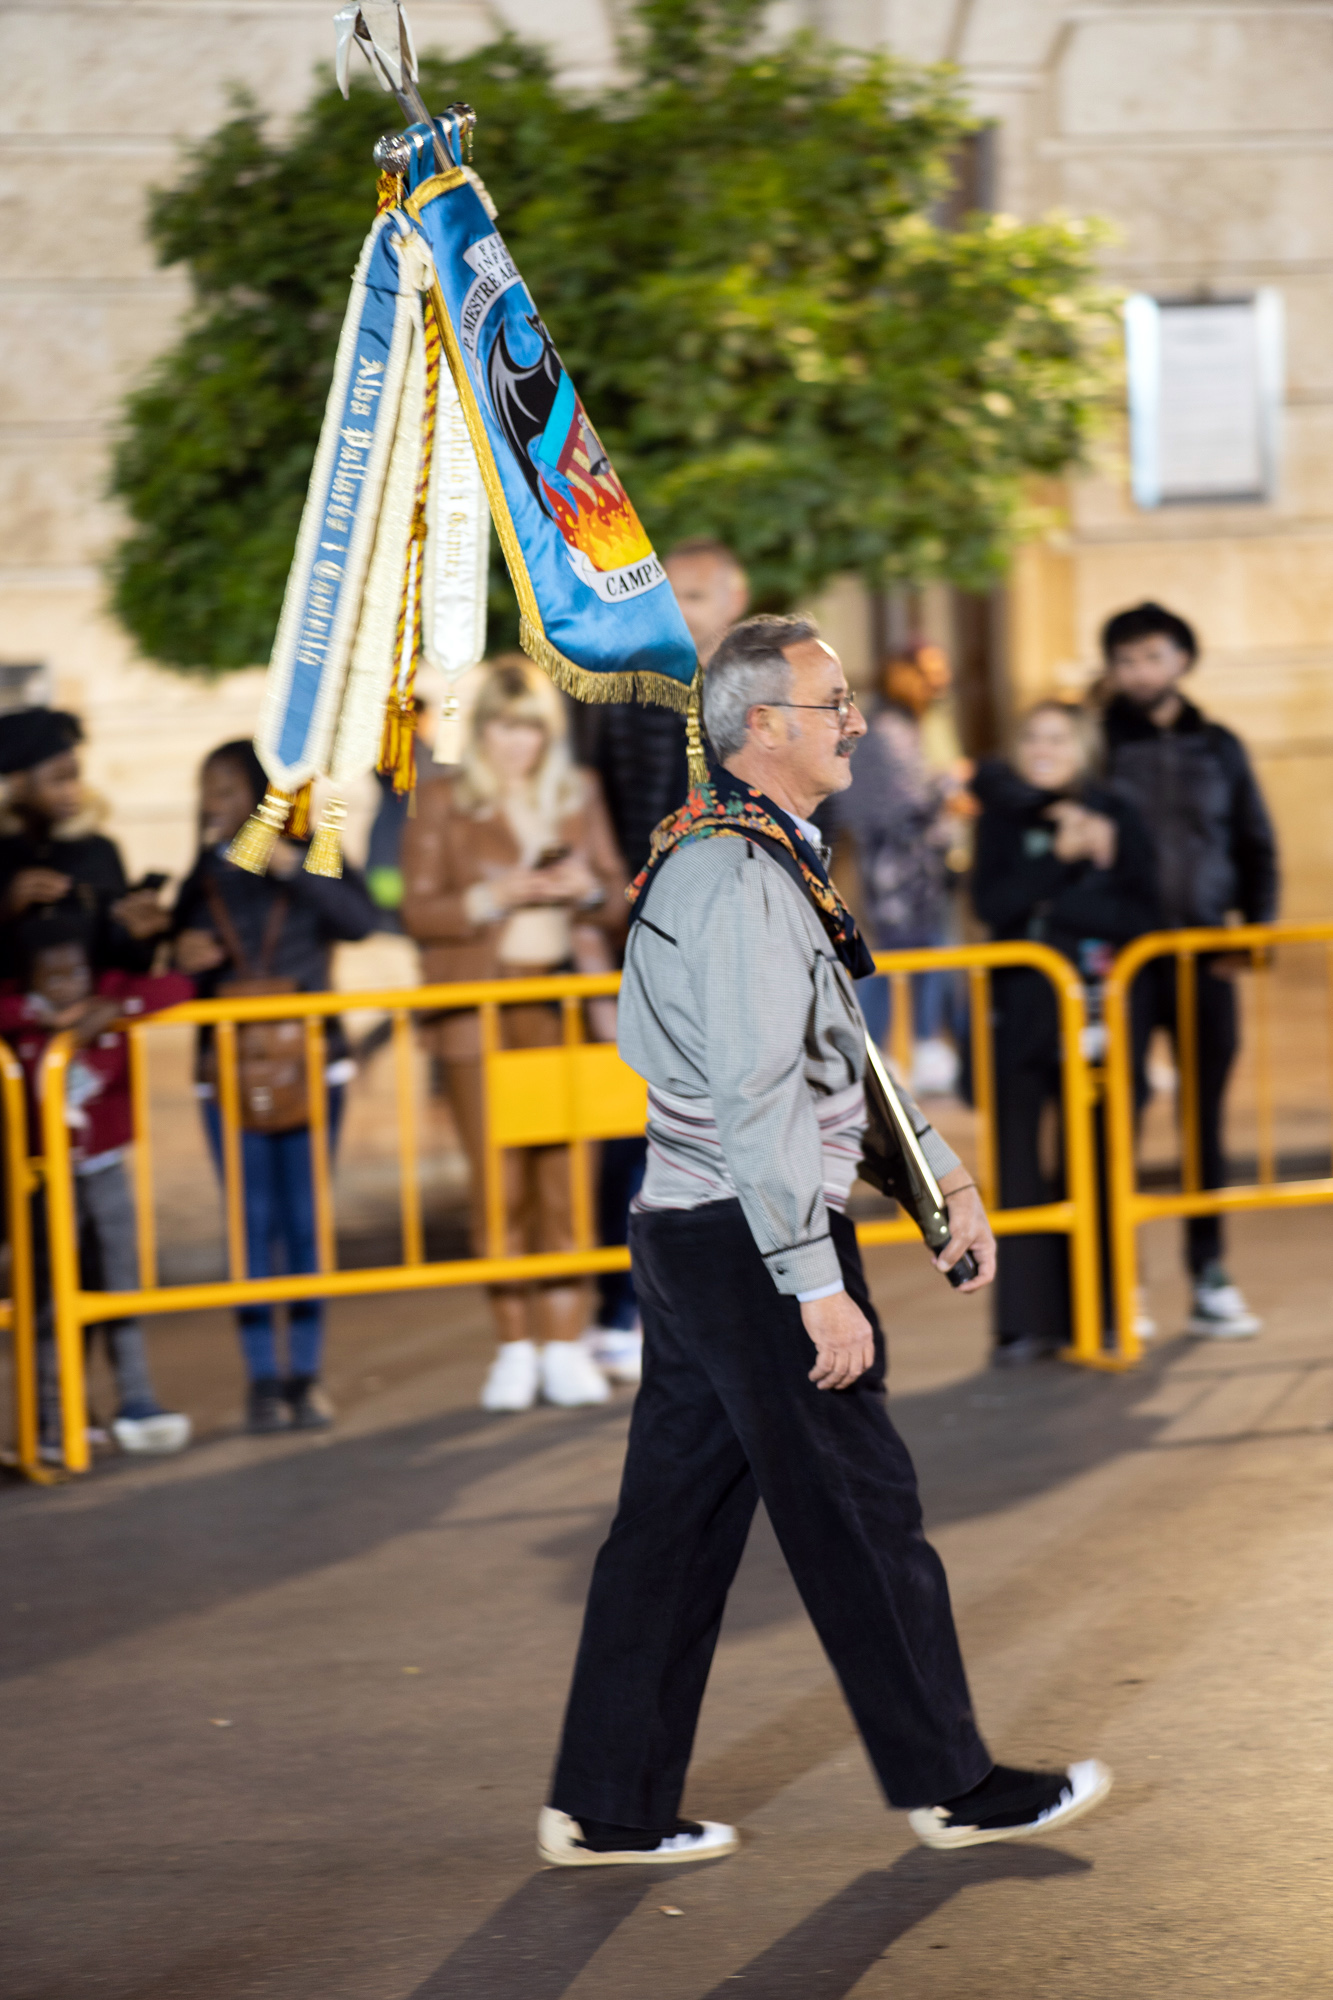 Walking with the Fallas Flags